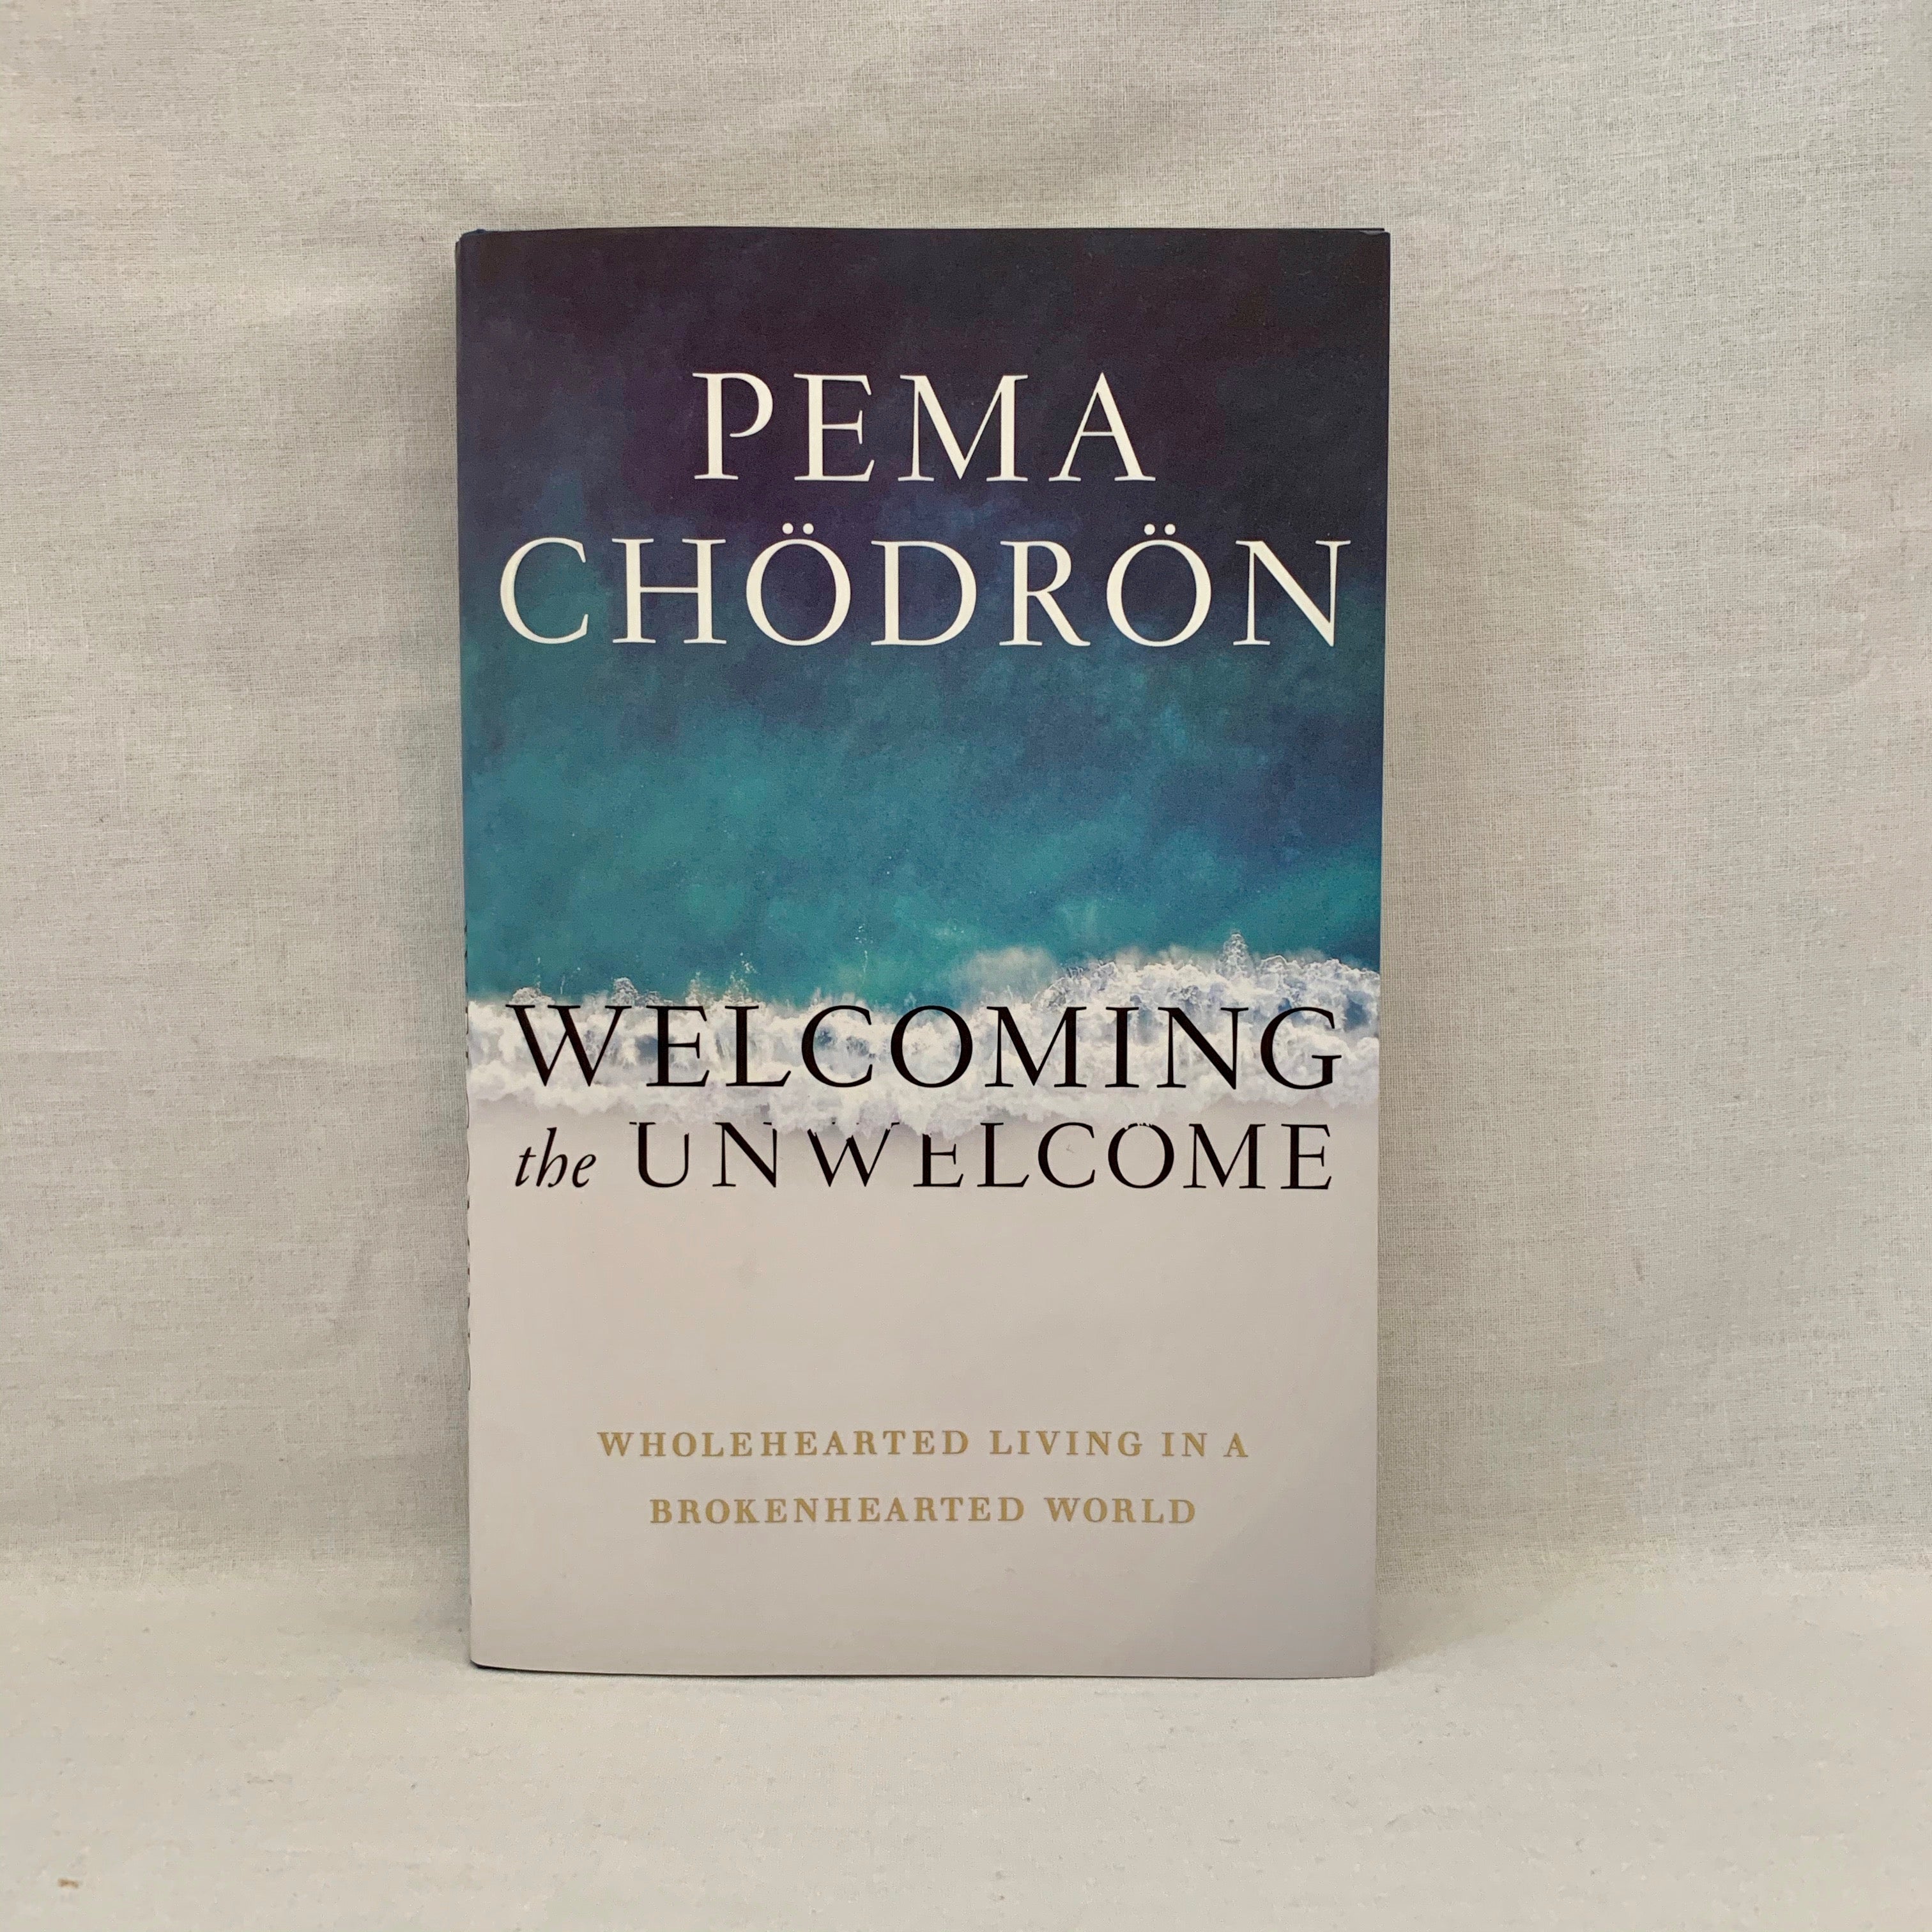 Welcoming the unwelcome by Pema Chodron